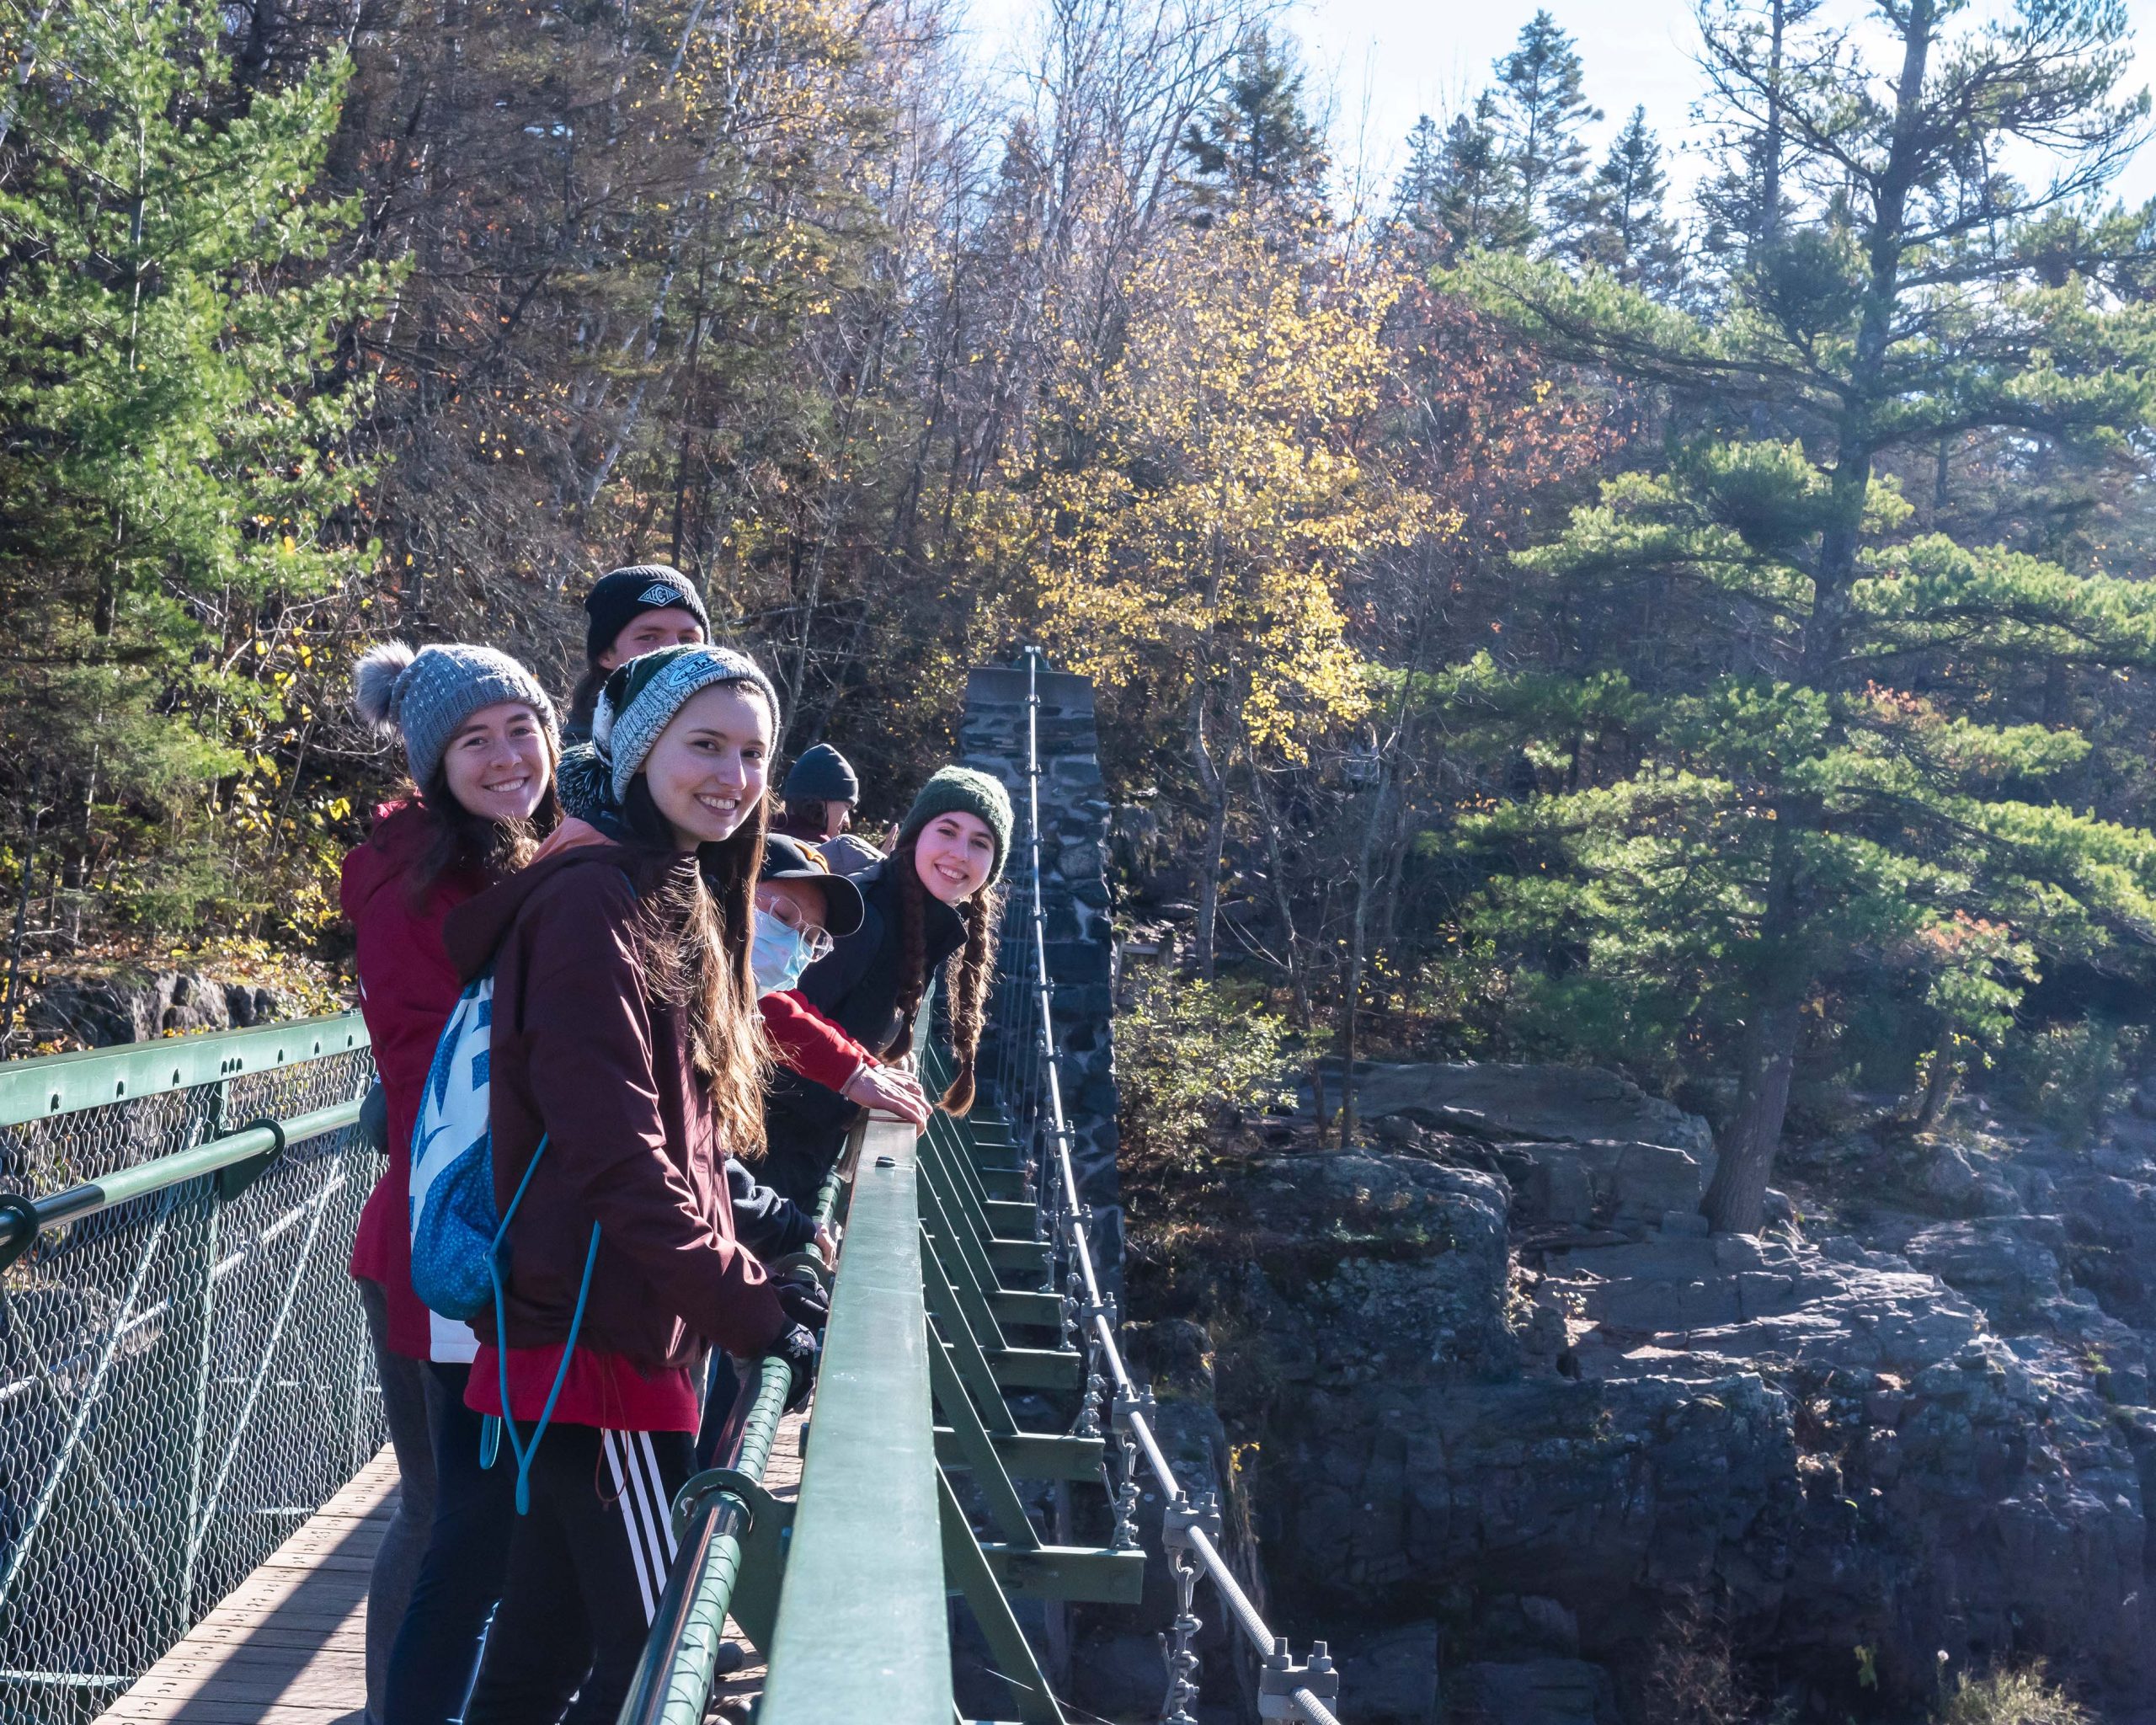 Five members of the Macalester Outing Club on trip to a Minnesota state park.